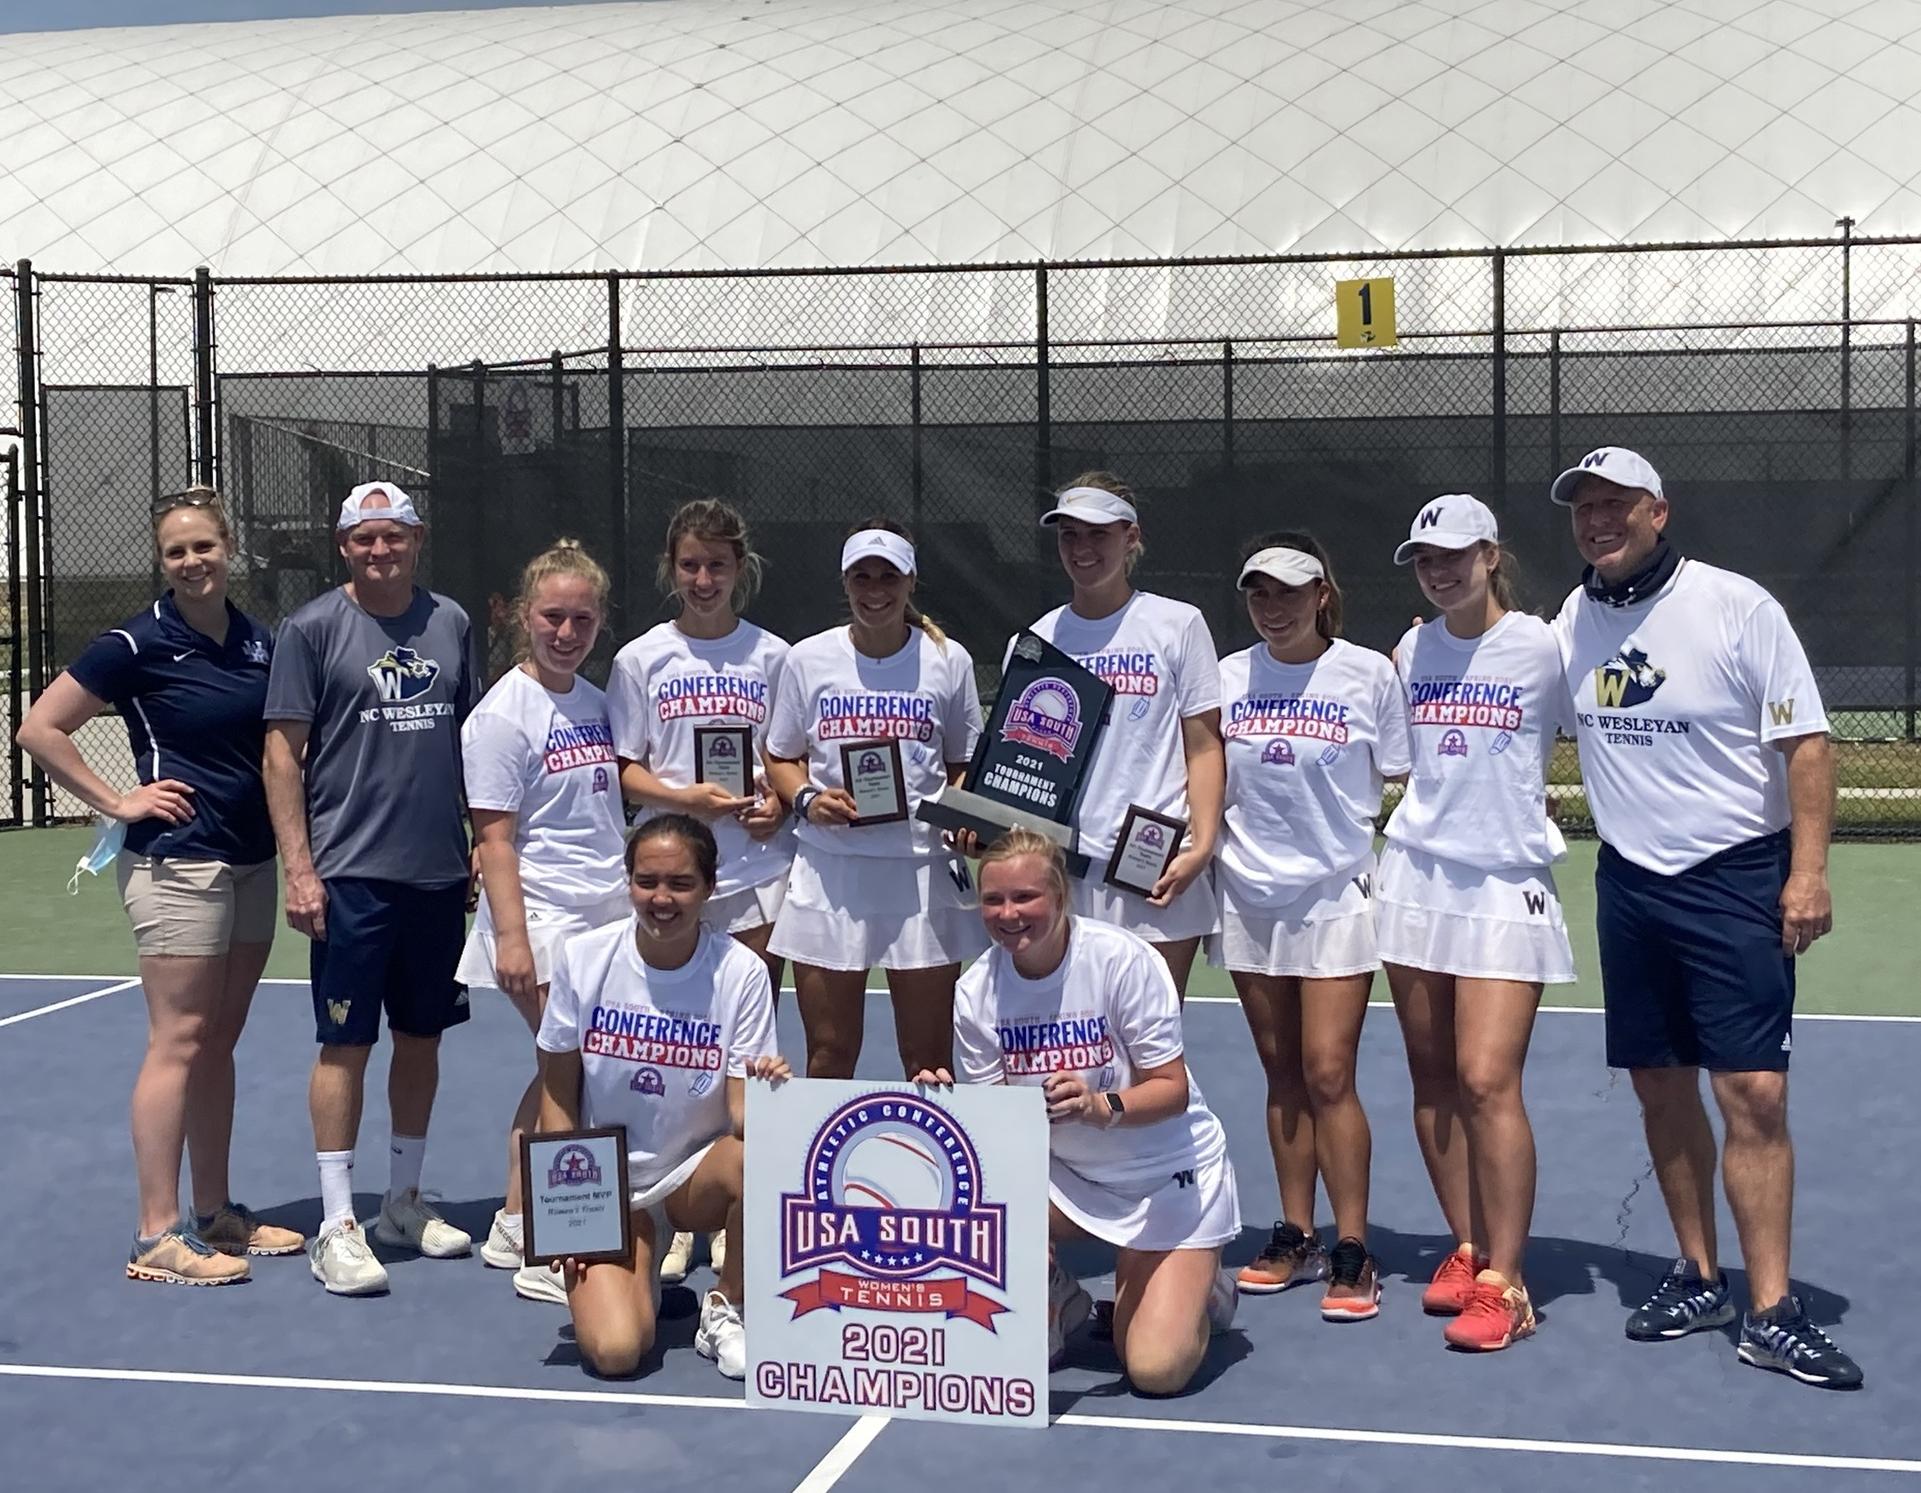 Women's Tennis Continues to Excel